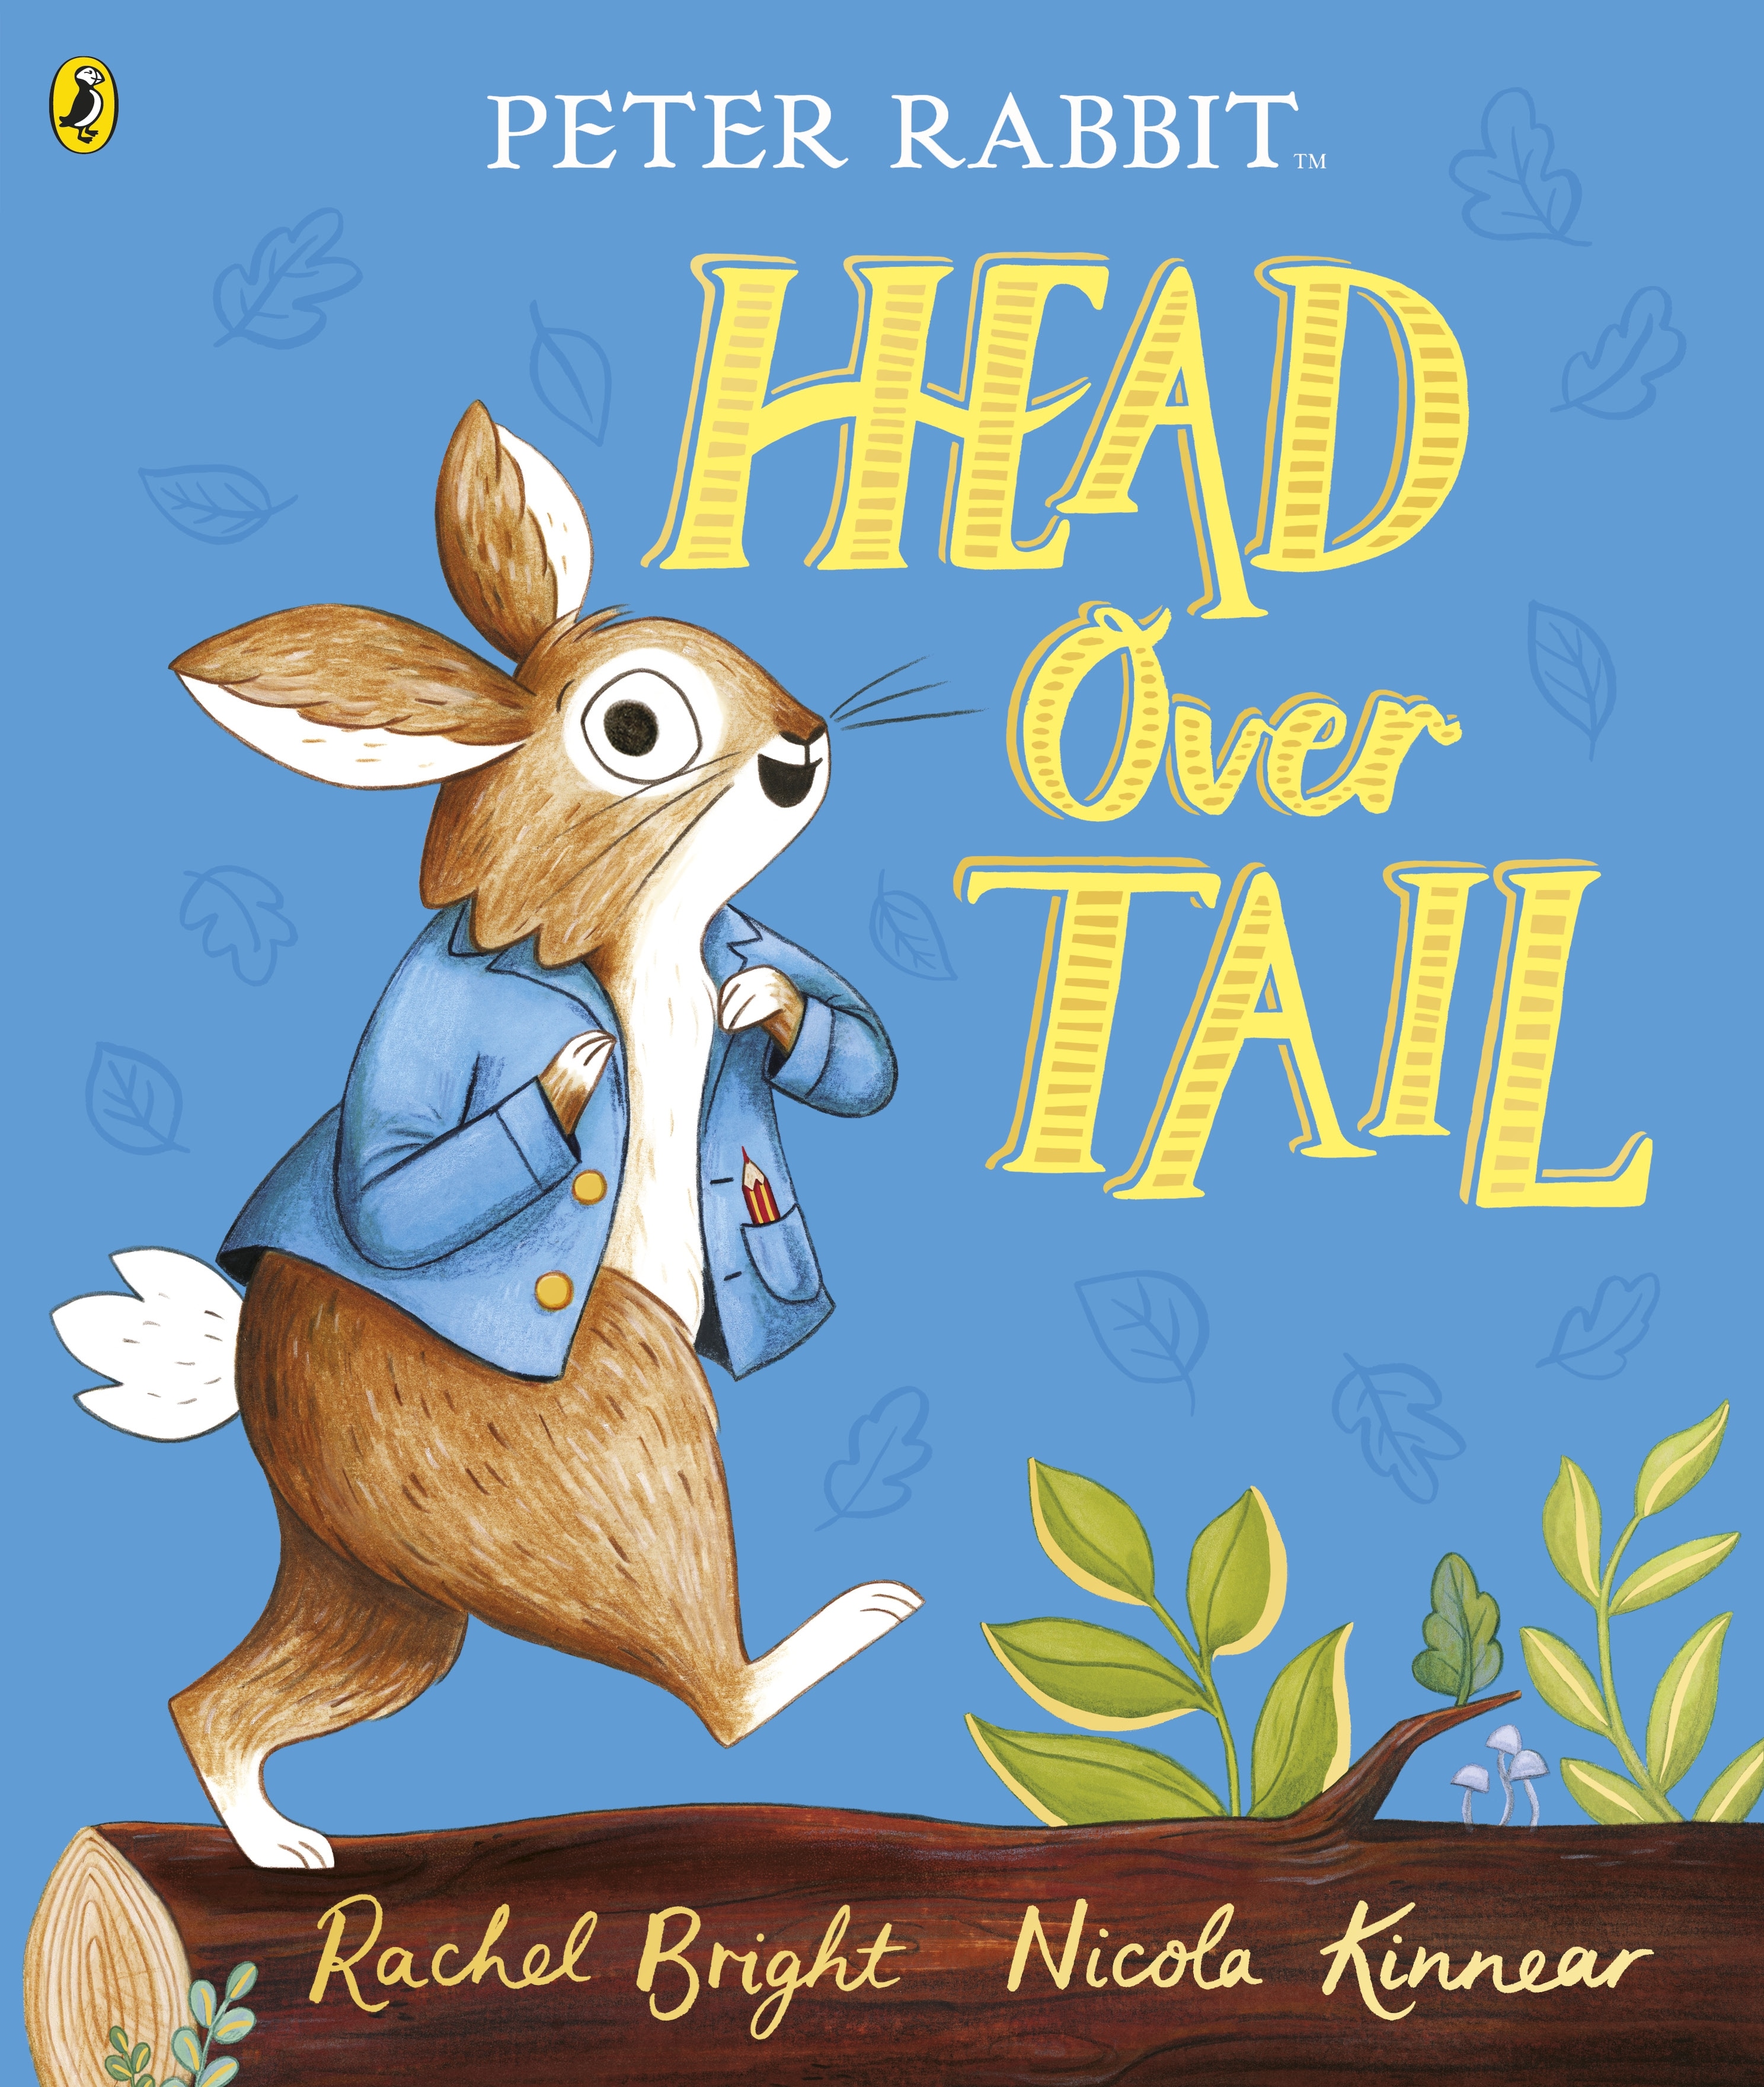 Book “Peter Rabbit: Head Over Tail” by Rachel Bright — May 27, 2021